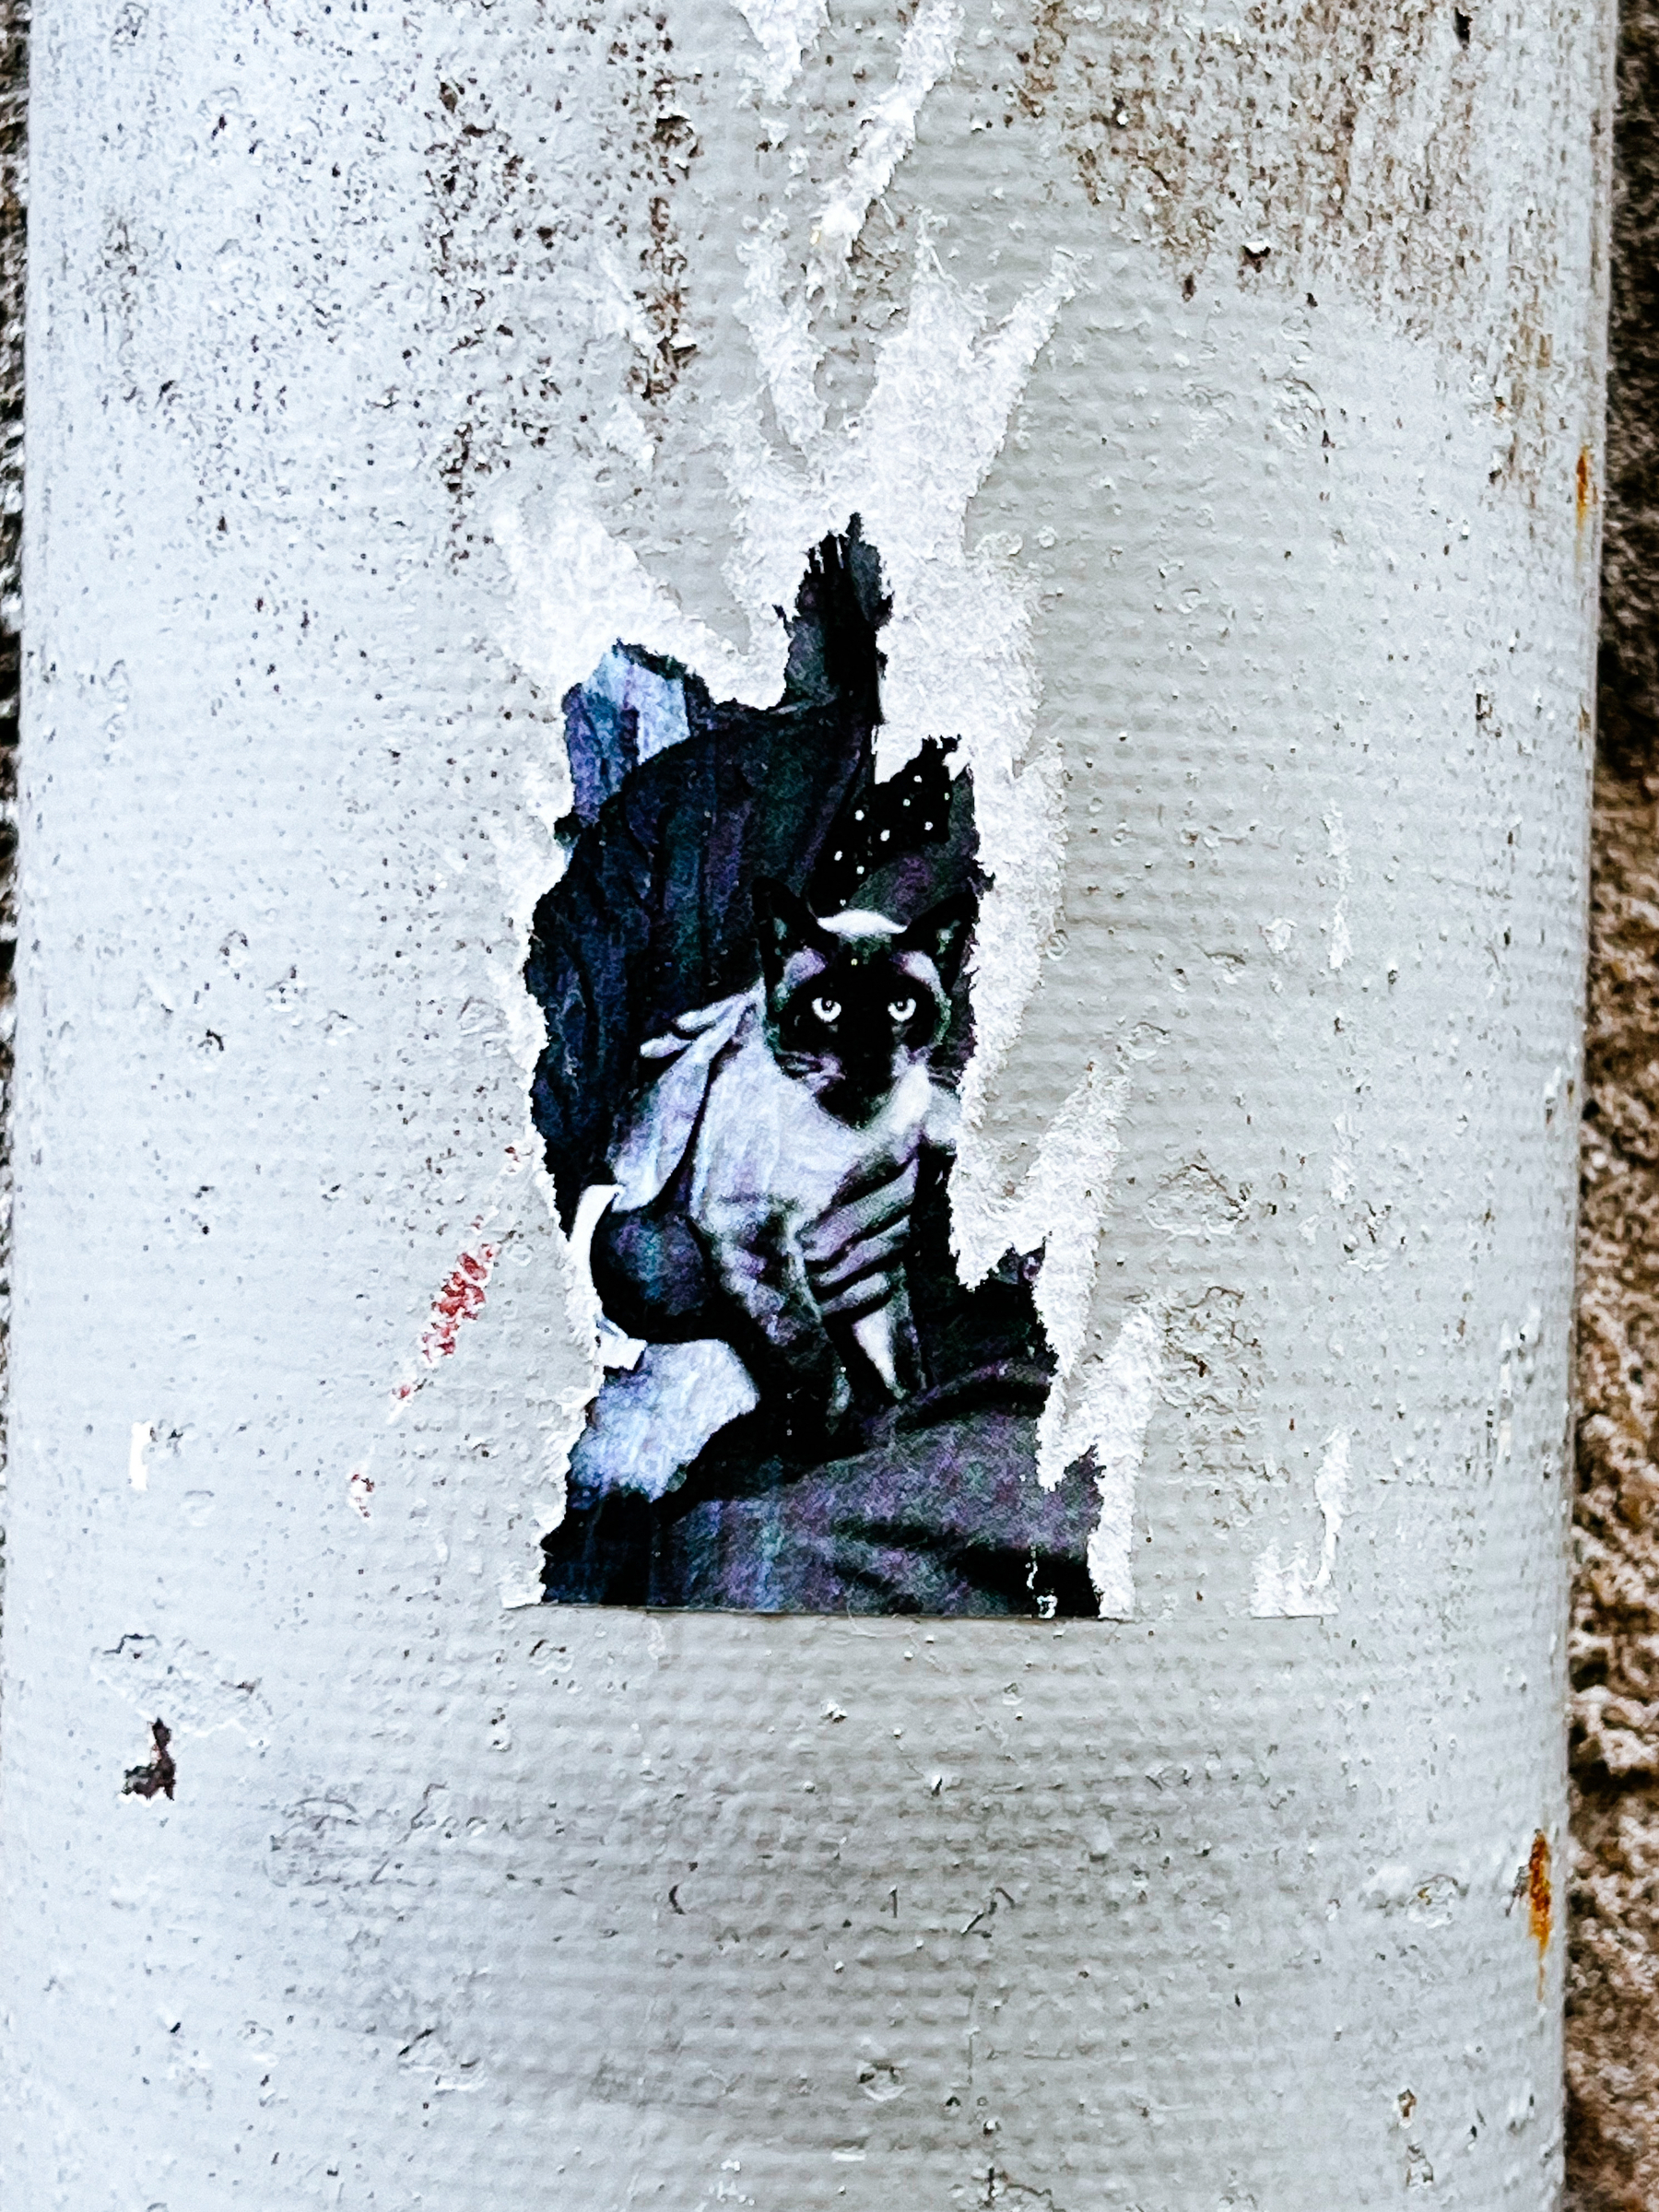 Torn sticker, we can still see a cat’s face, and a hand holding it. 